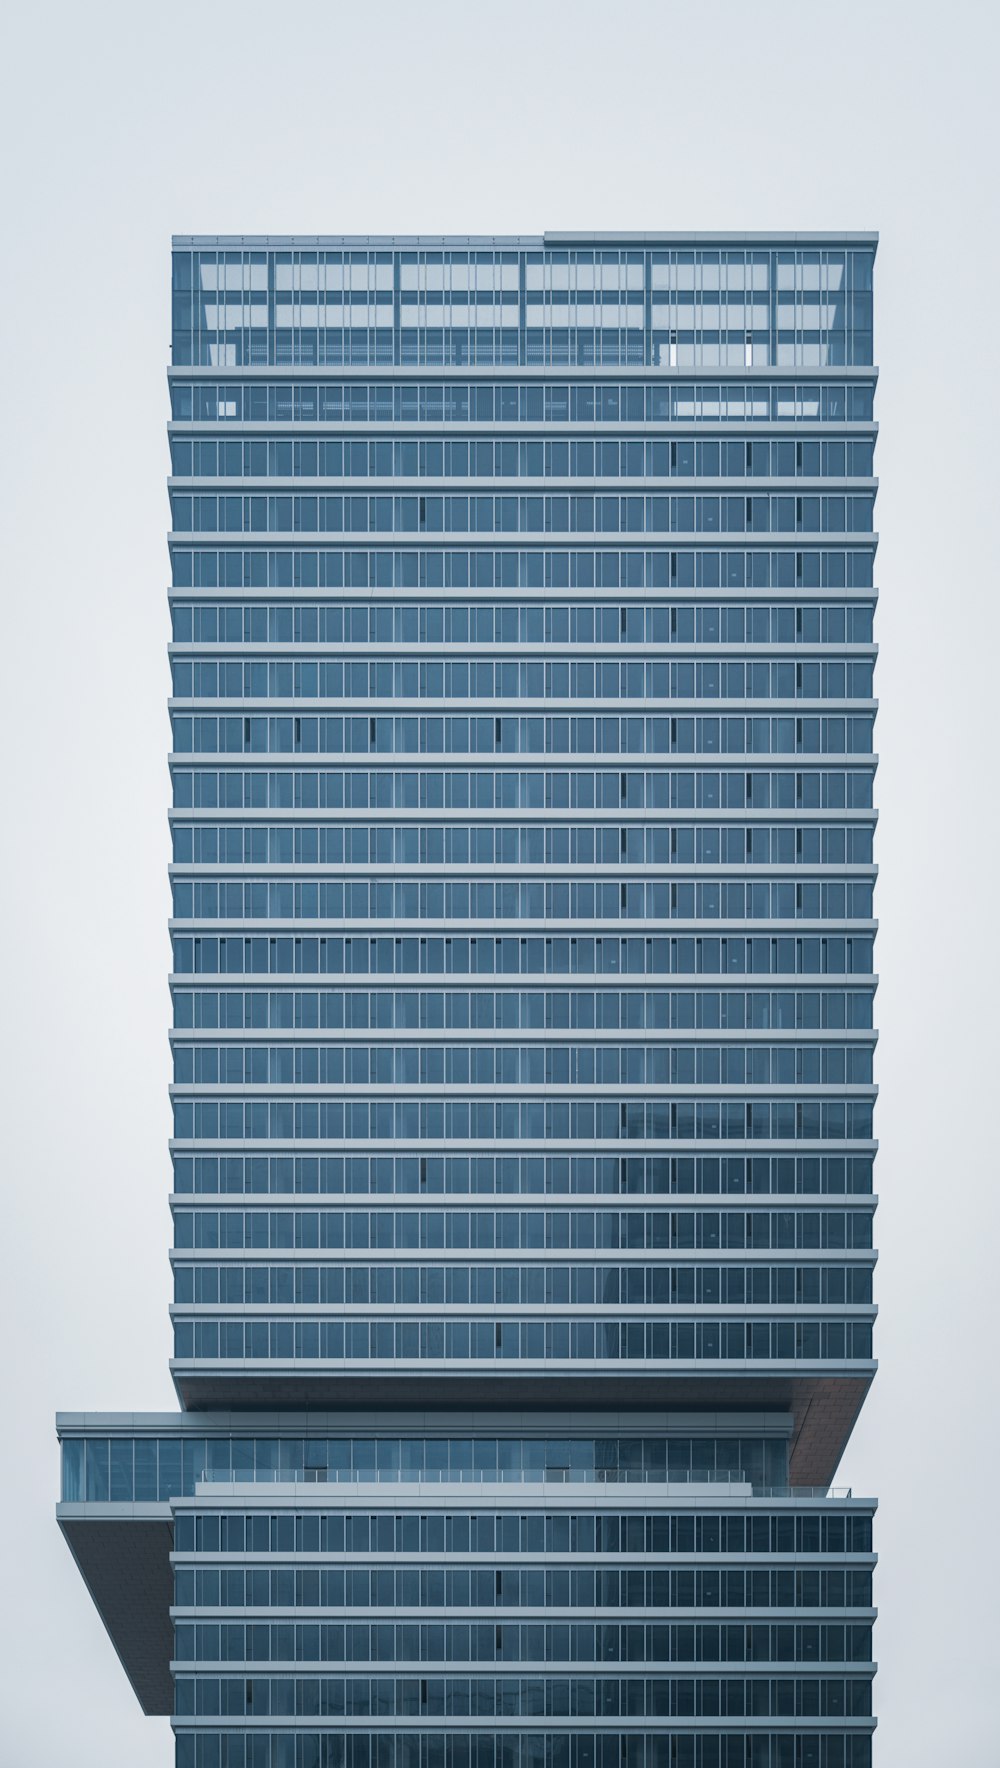 a very tall building with a lot of windows